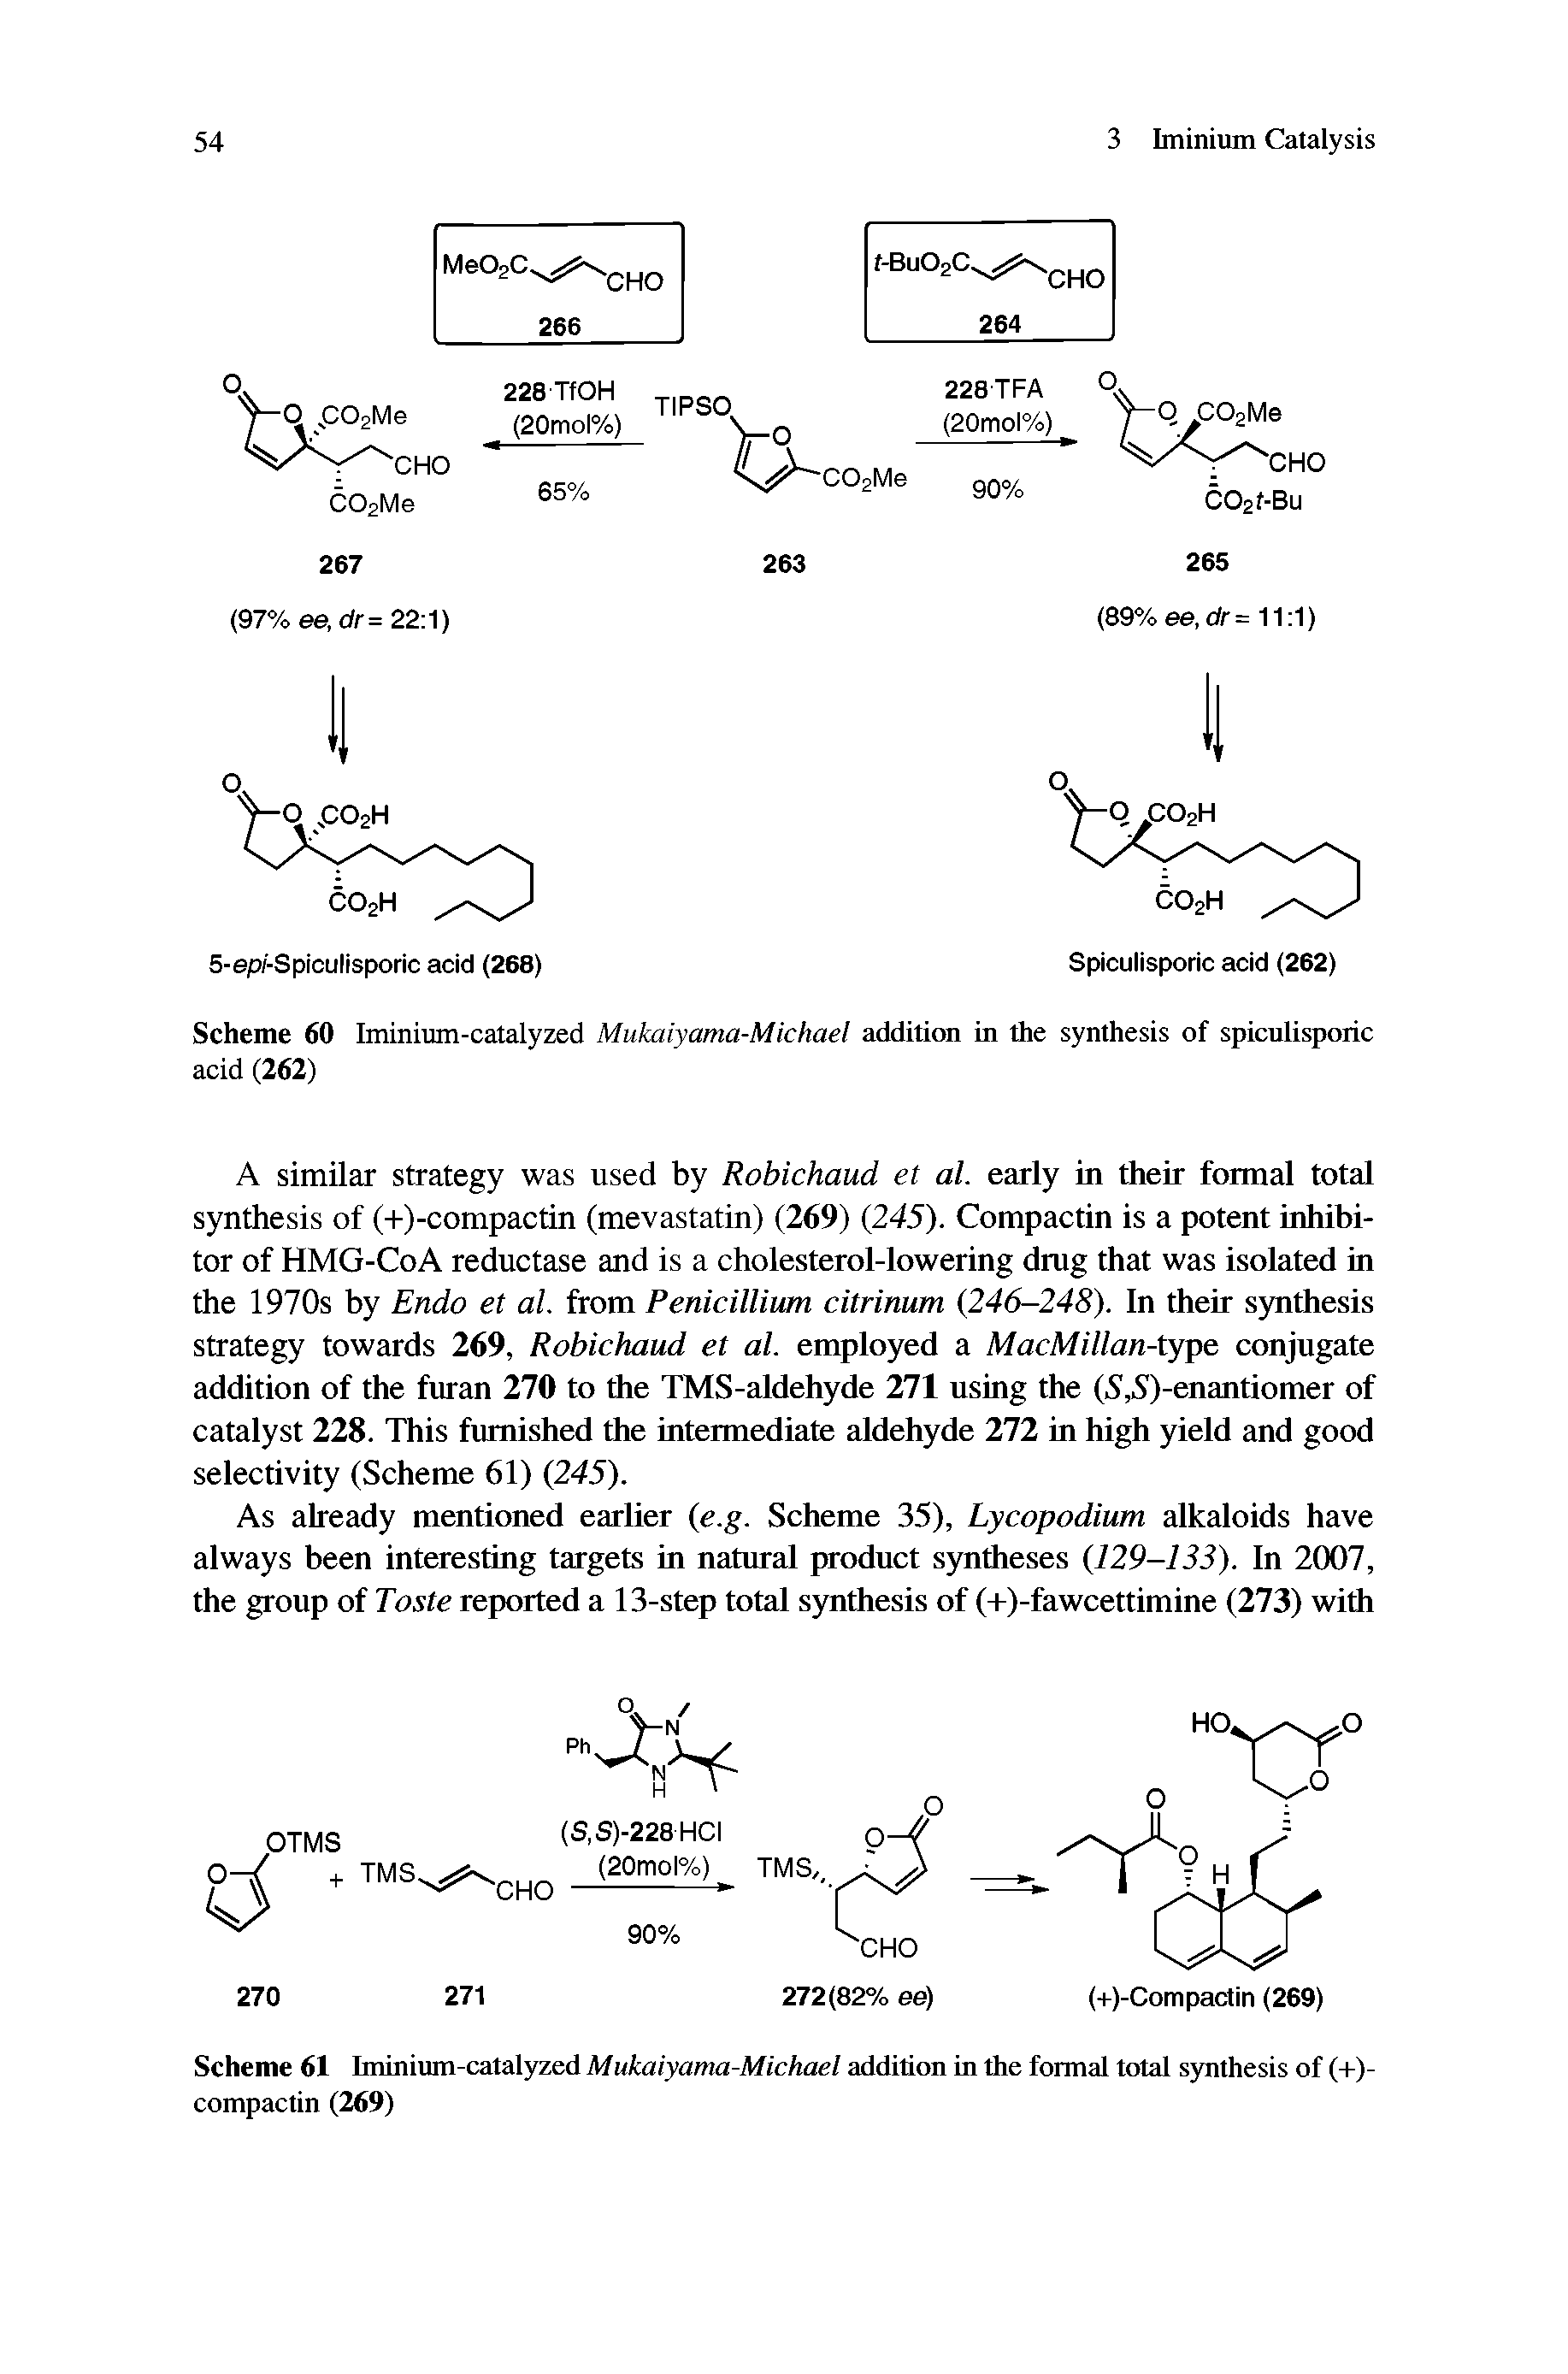 Scheme 61 Iminium-catalyzed Mukaiyama-Michael addition in the formal total synthesis of (-1-)-compactin (269)...